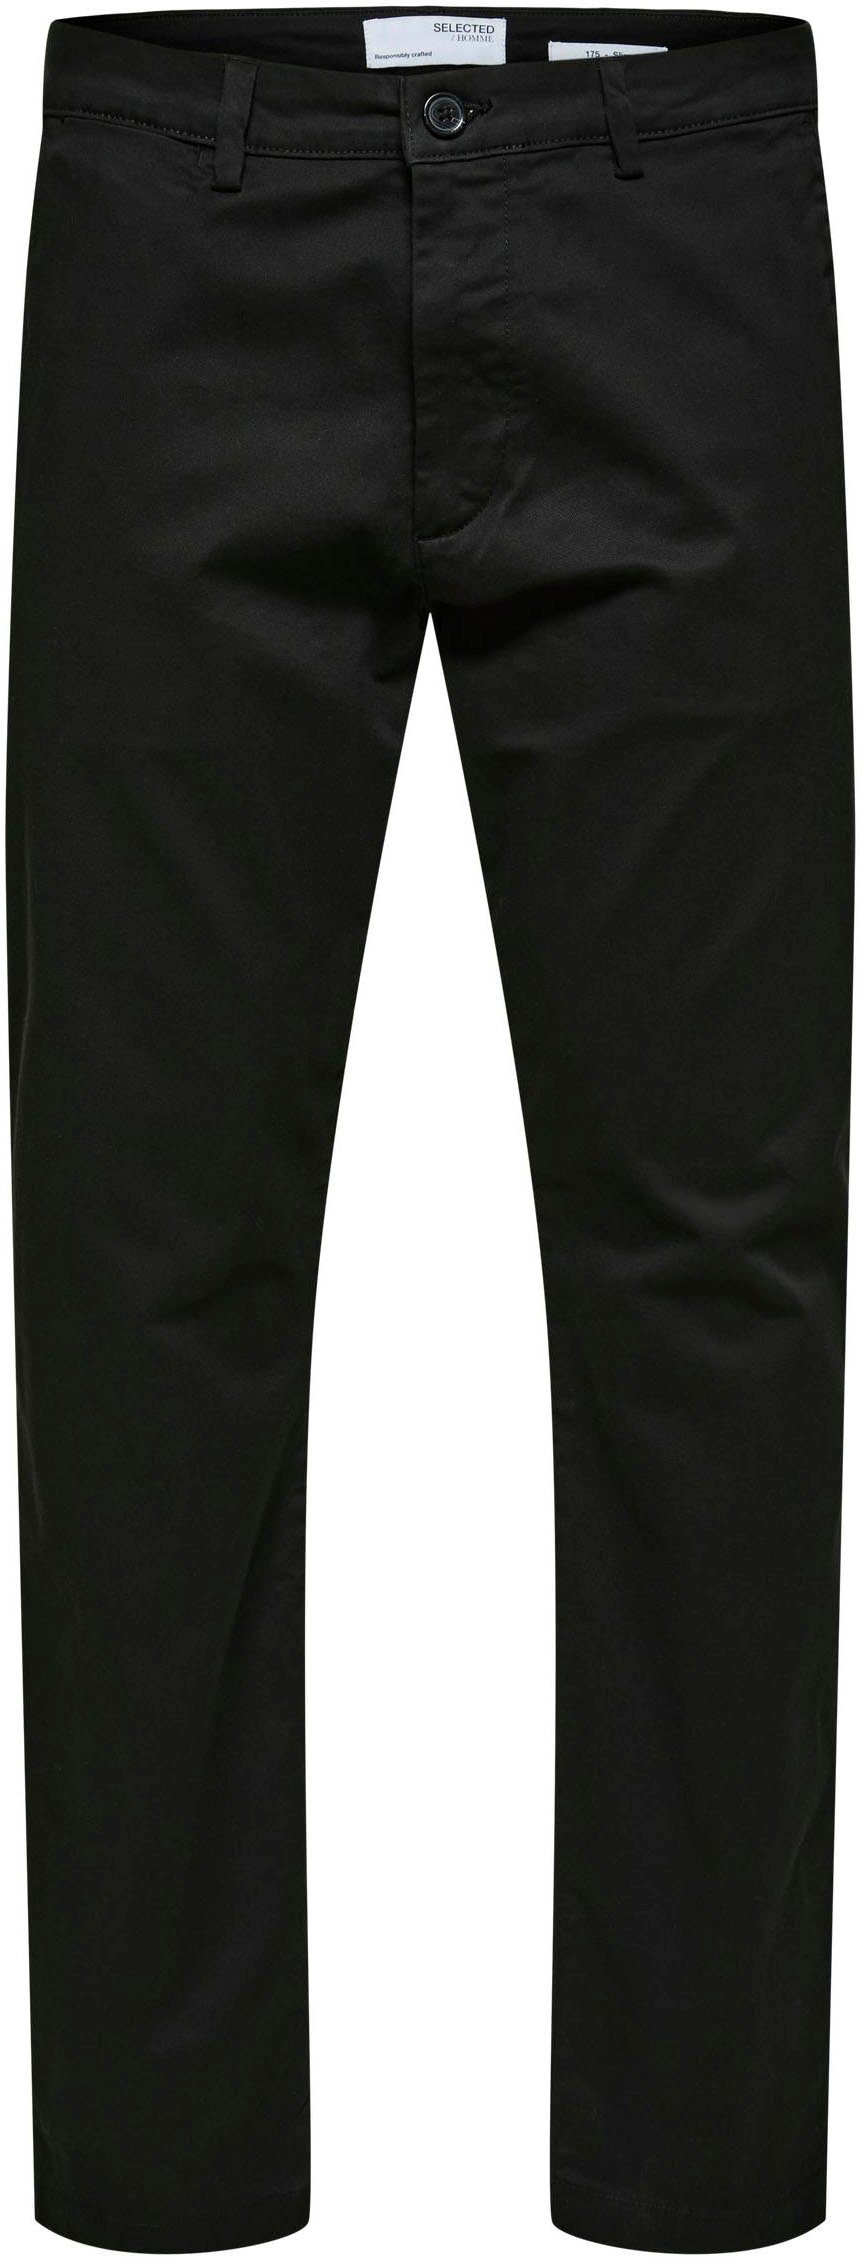 HOMME FLEX SELECTED PANT NOOS black Chinohose MILES SLH175-SLIM NEW